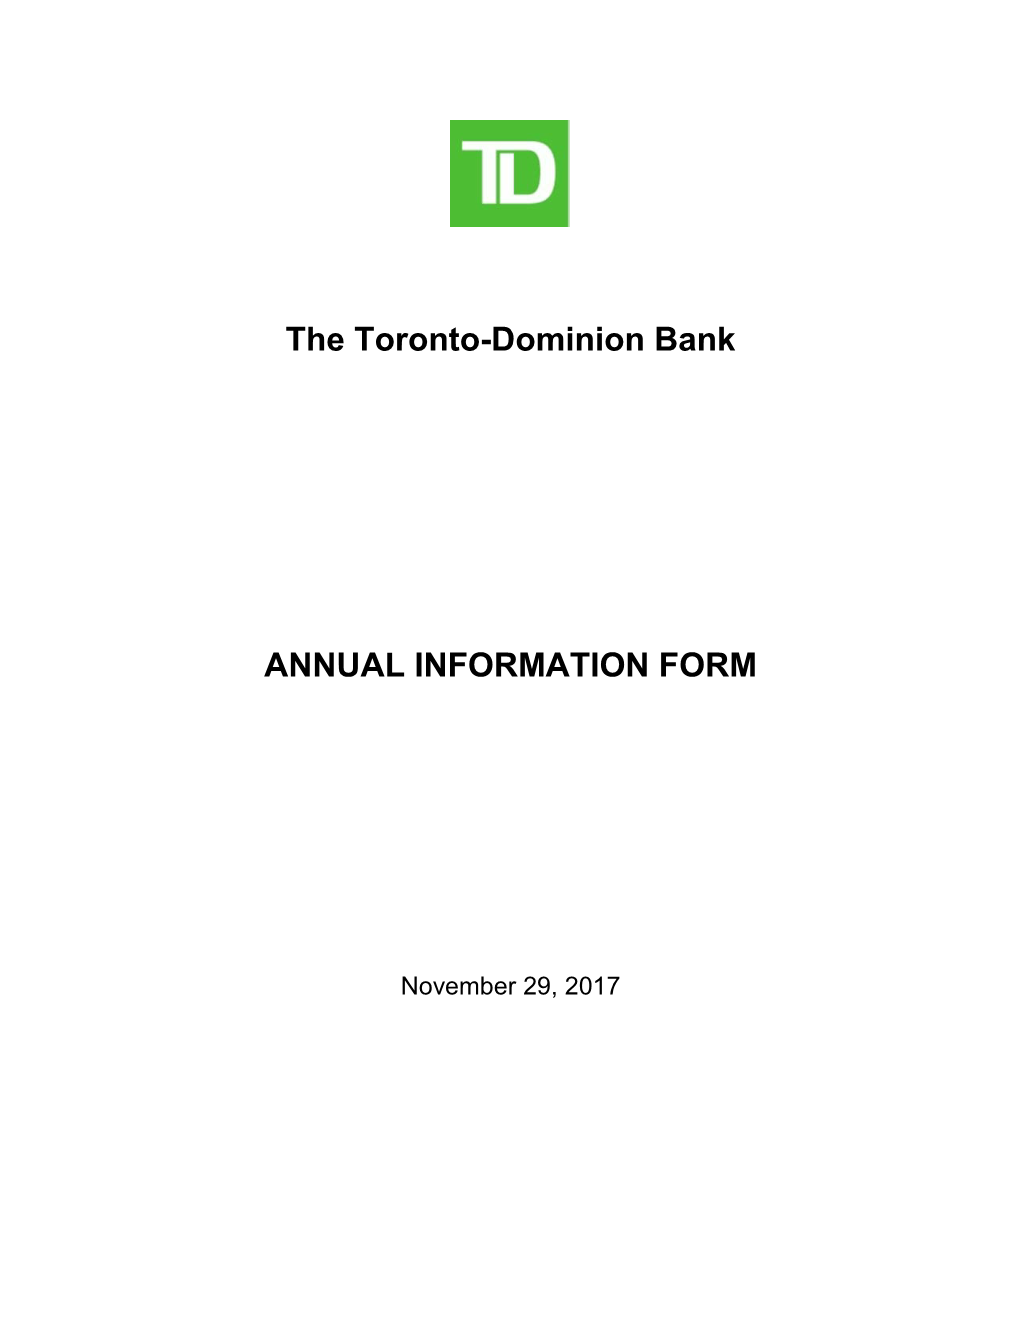 The Toronto-Dominion Bank ANNUAL INFORMATION FORM